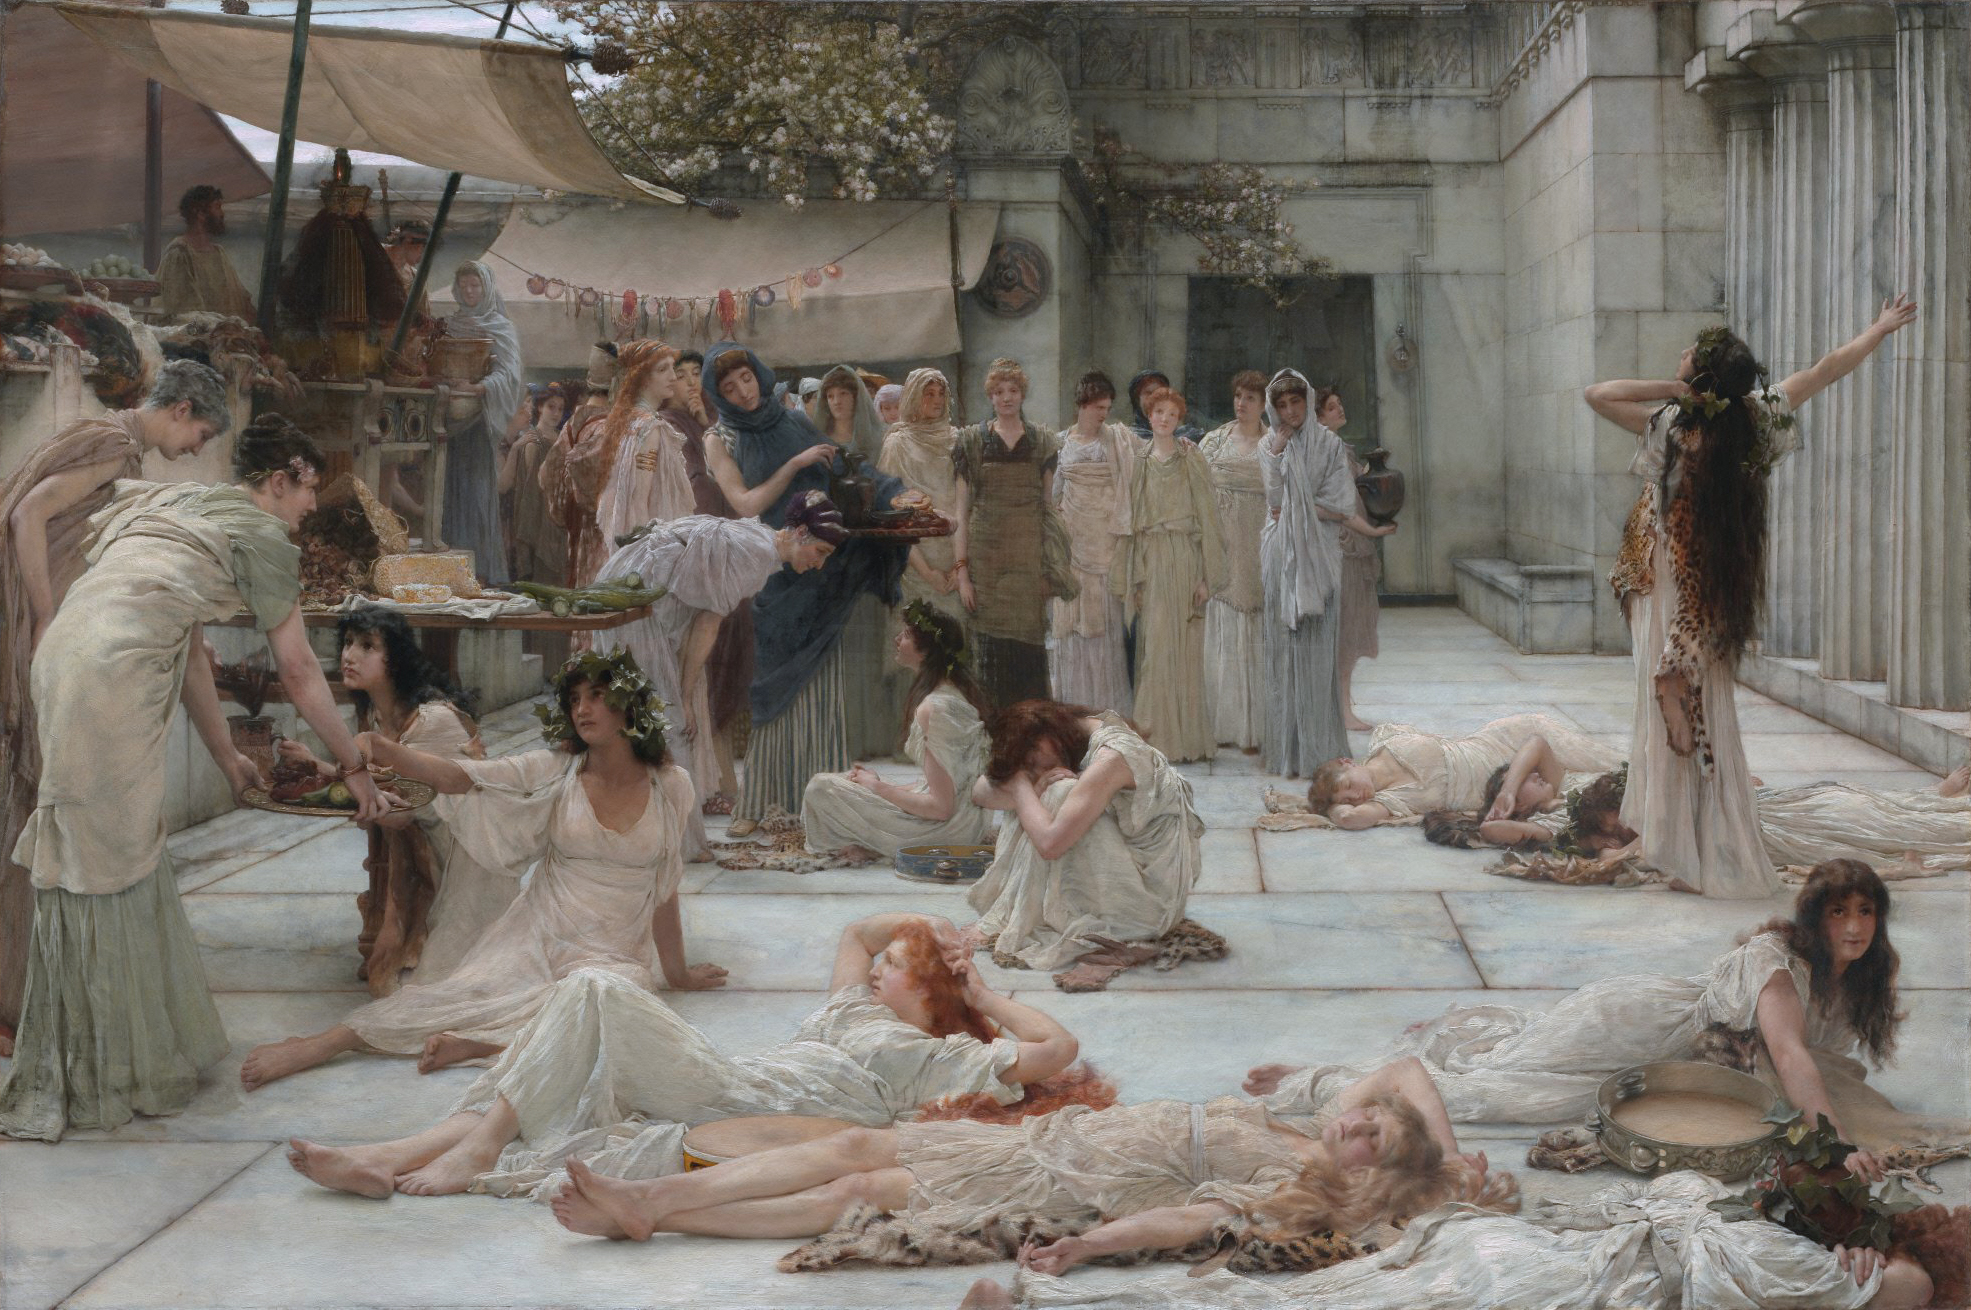 The Women of Amphissa by Lawrence Alma-Tadema - 1877 - 182.8 x 121.8 cm private collection